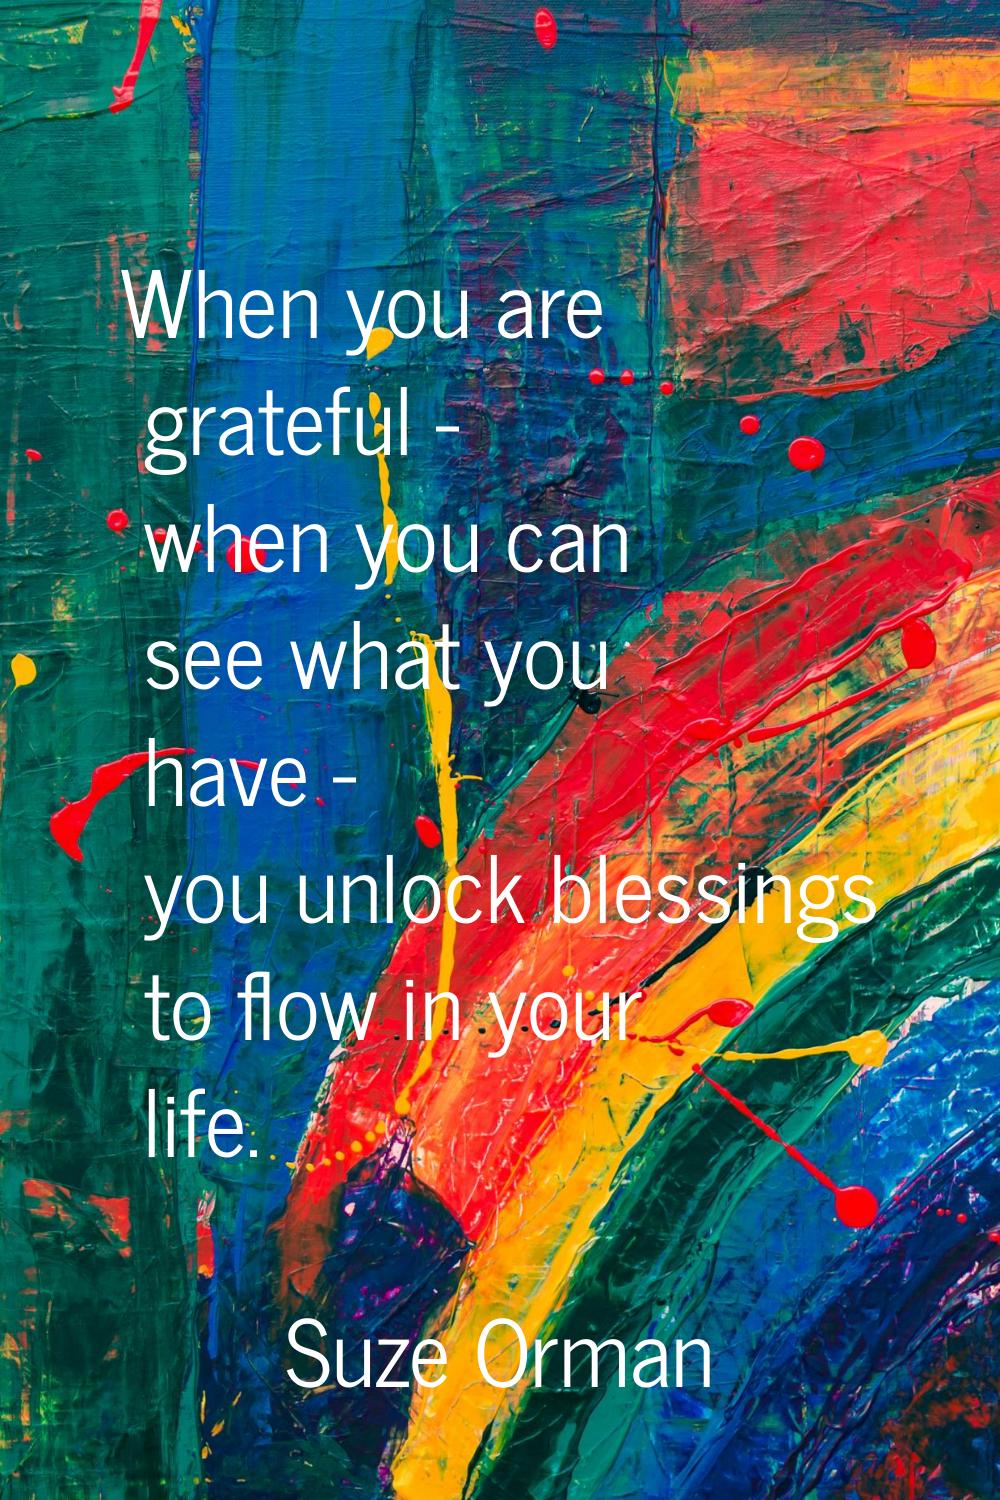 When you are grateful - when you can see what you have - you unlock blessings to flow in your life.